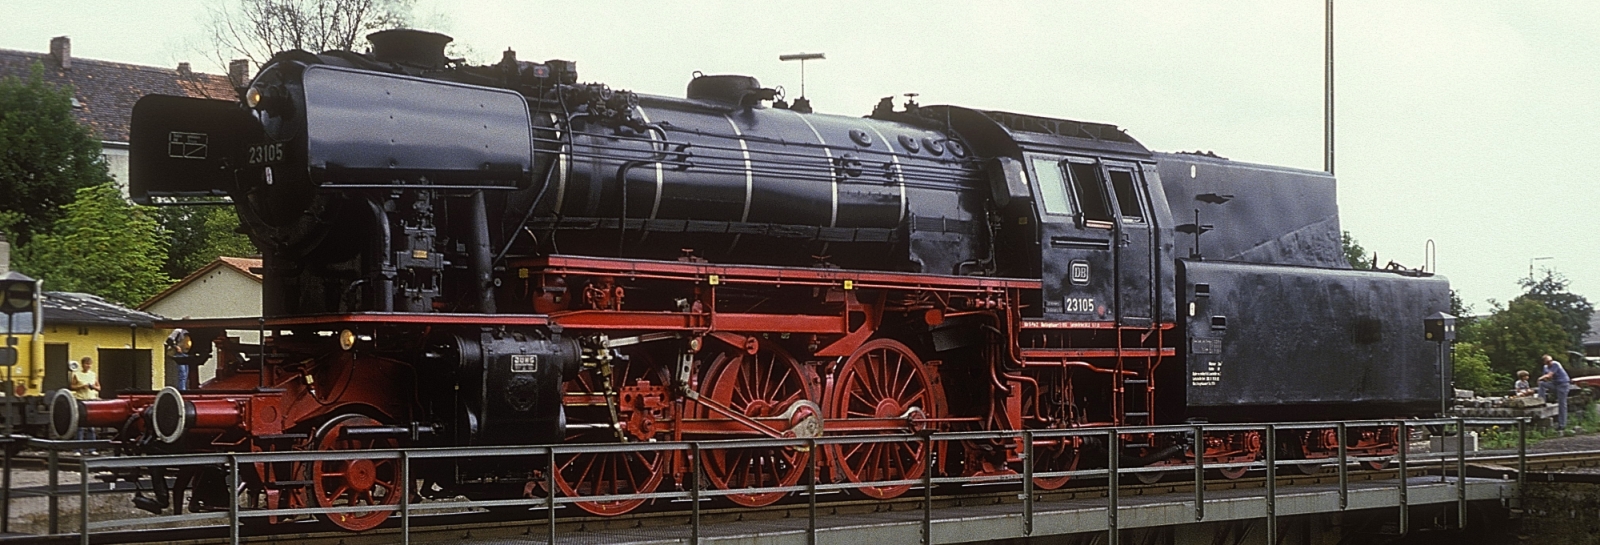 The last built 23 105 in July 1985 in Amberg with the original lettering